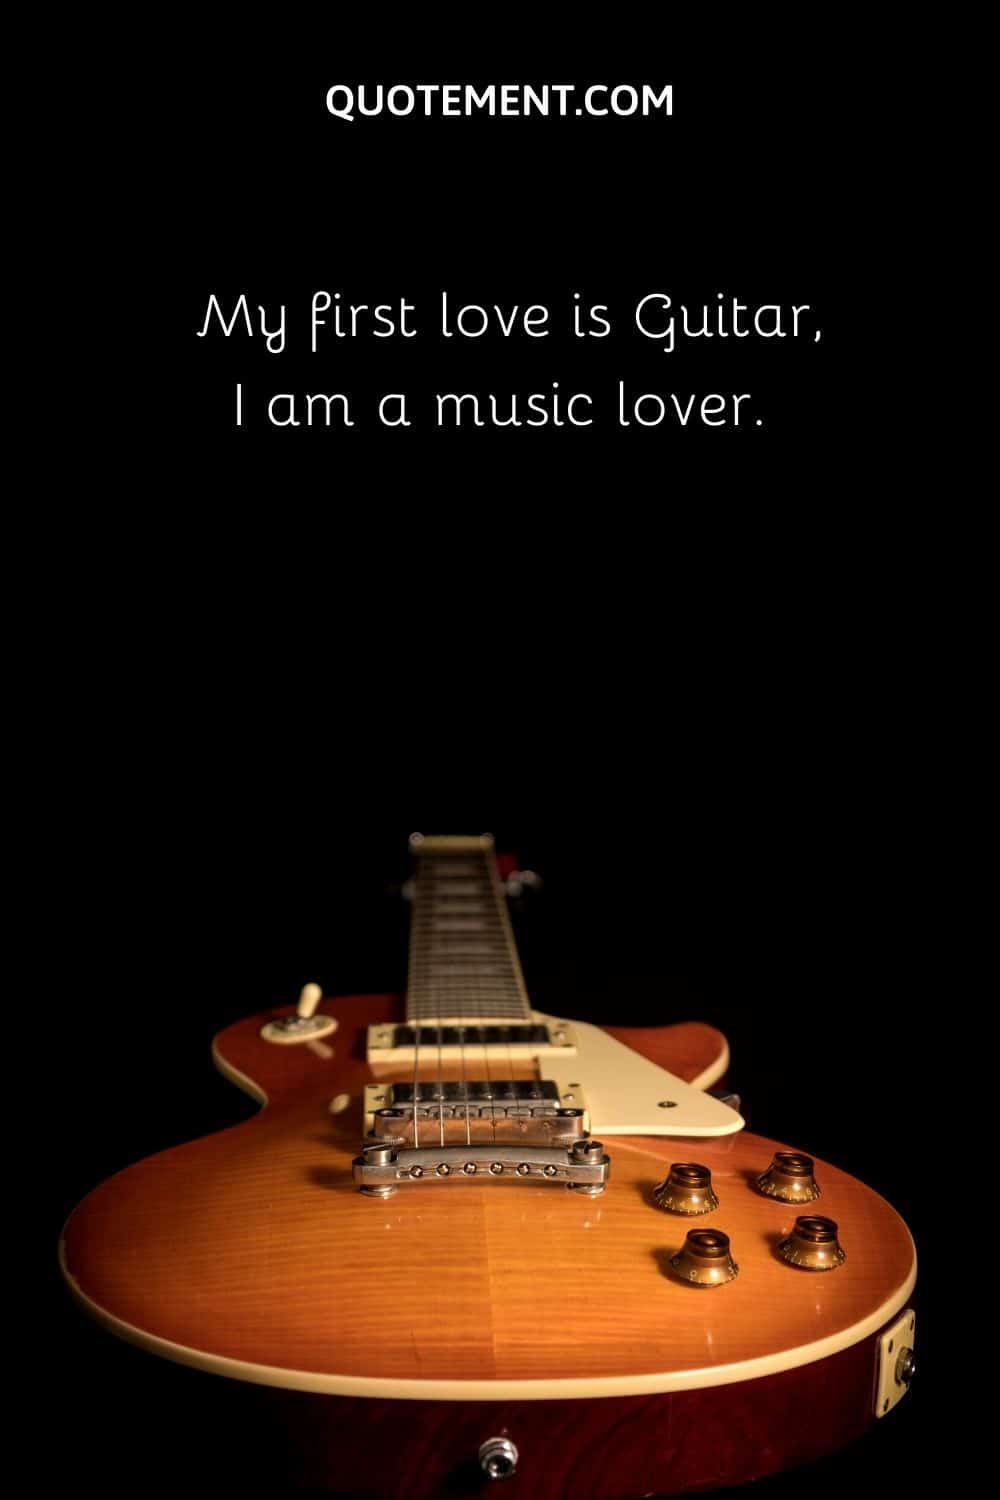 My first love is Guitar, I am a music lover.